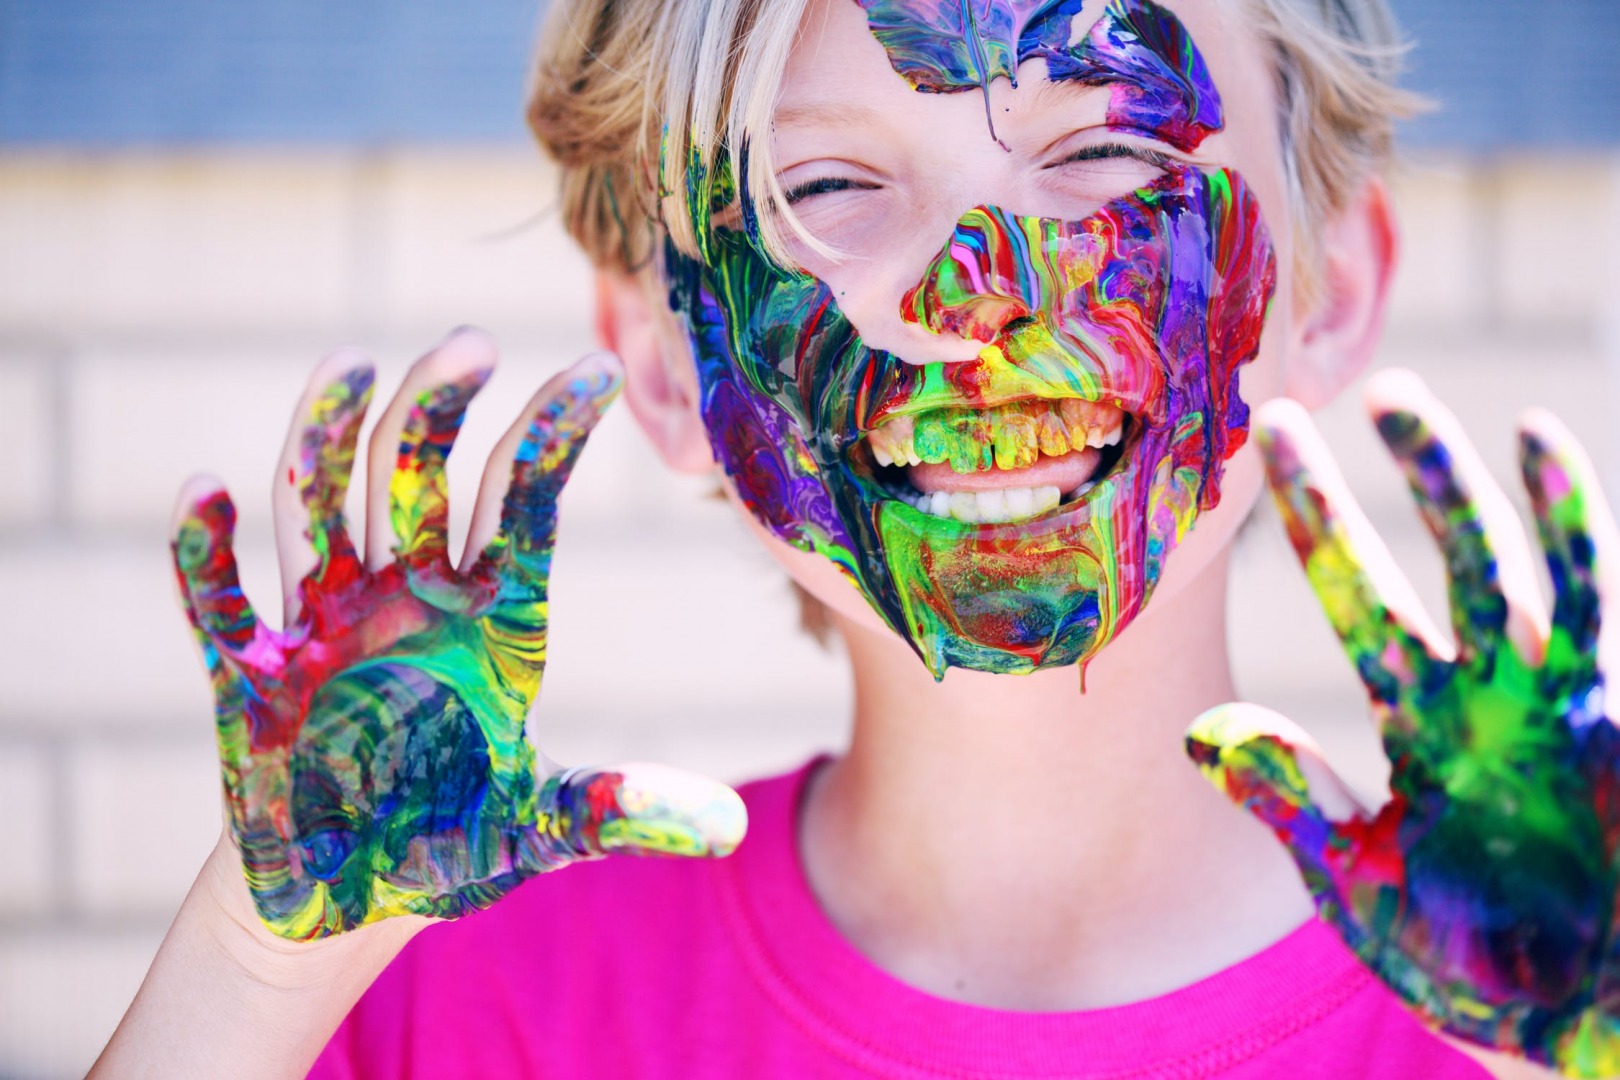 Why Are Children So Much More Creative Than Adults?